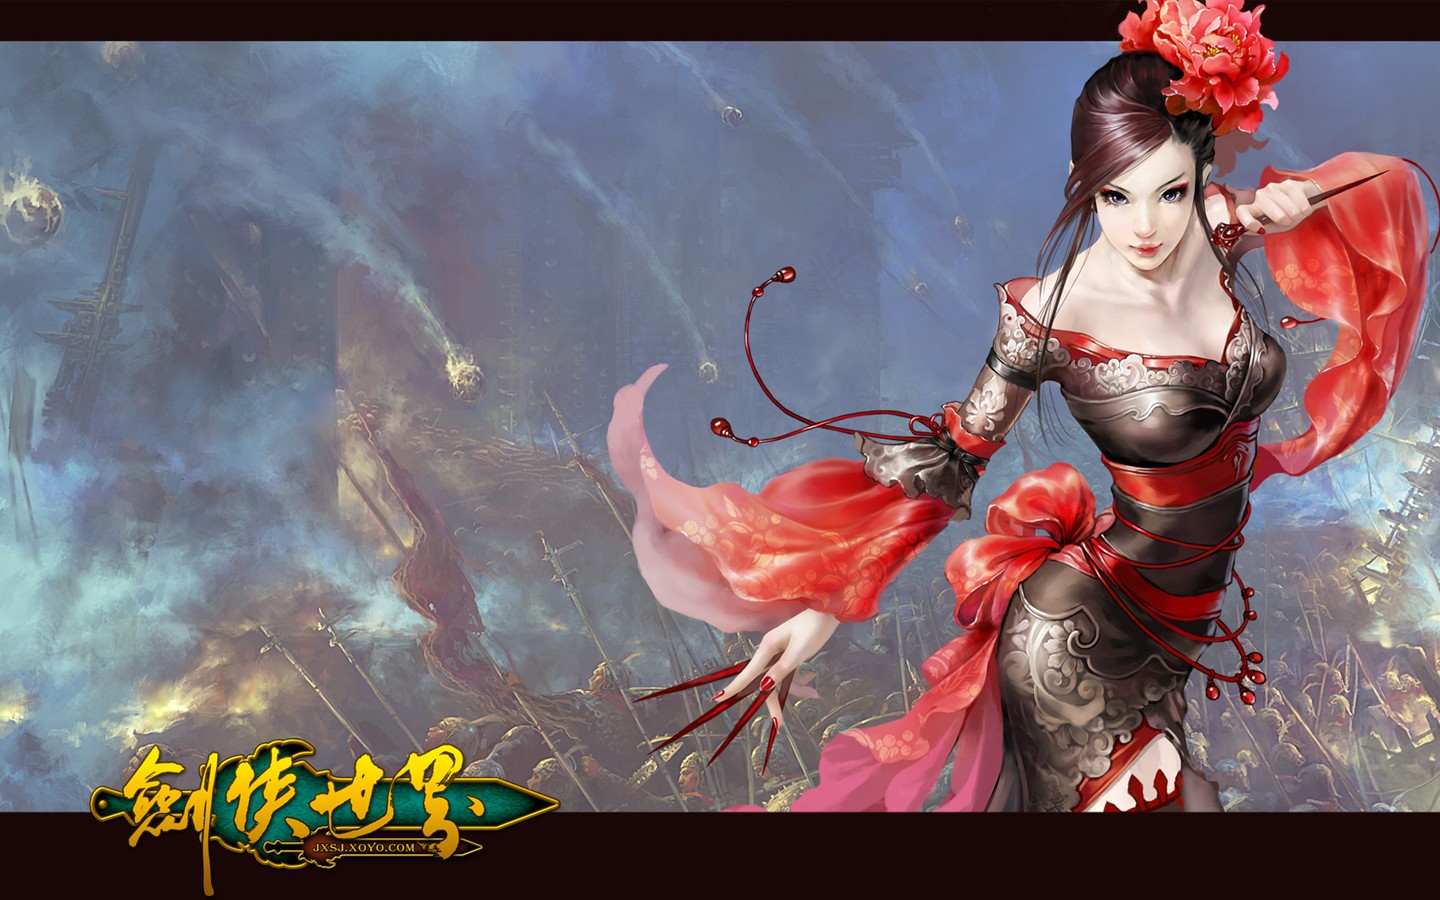 D of the swordsman in the world martial arts online game wallpaper